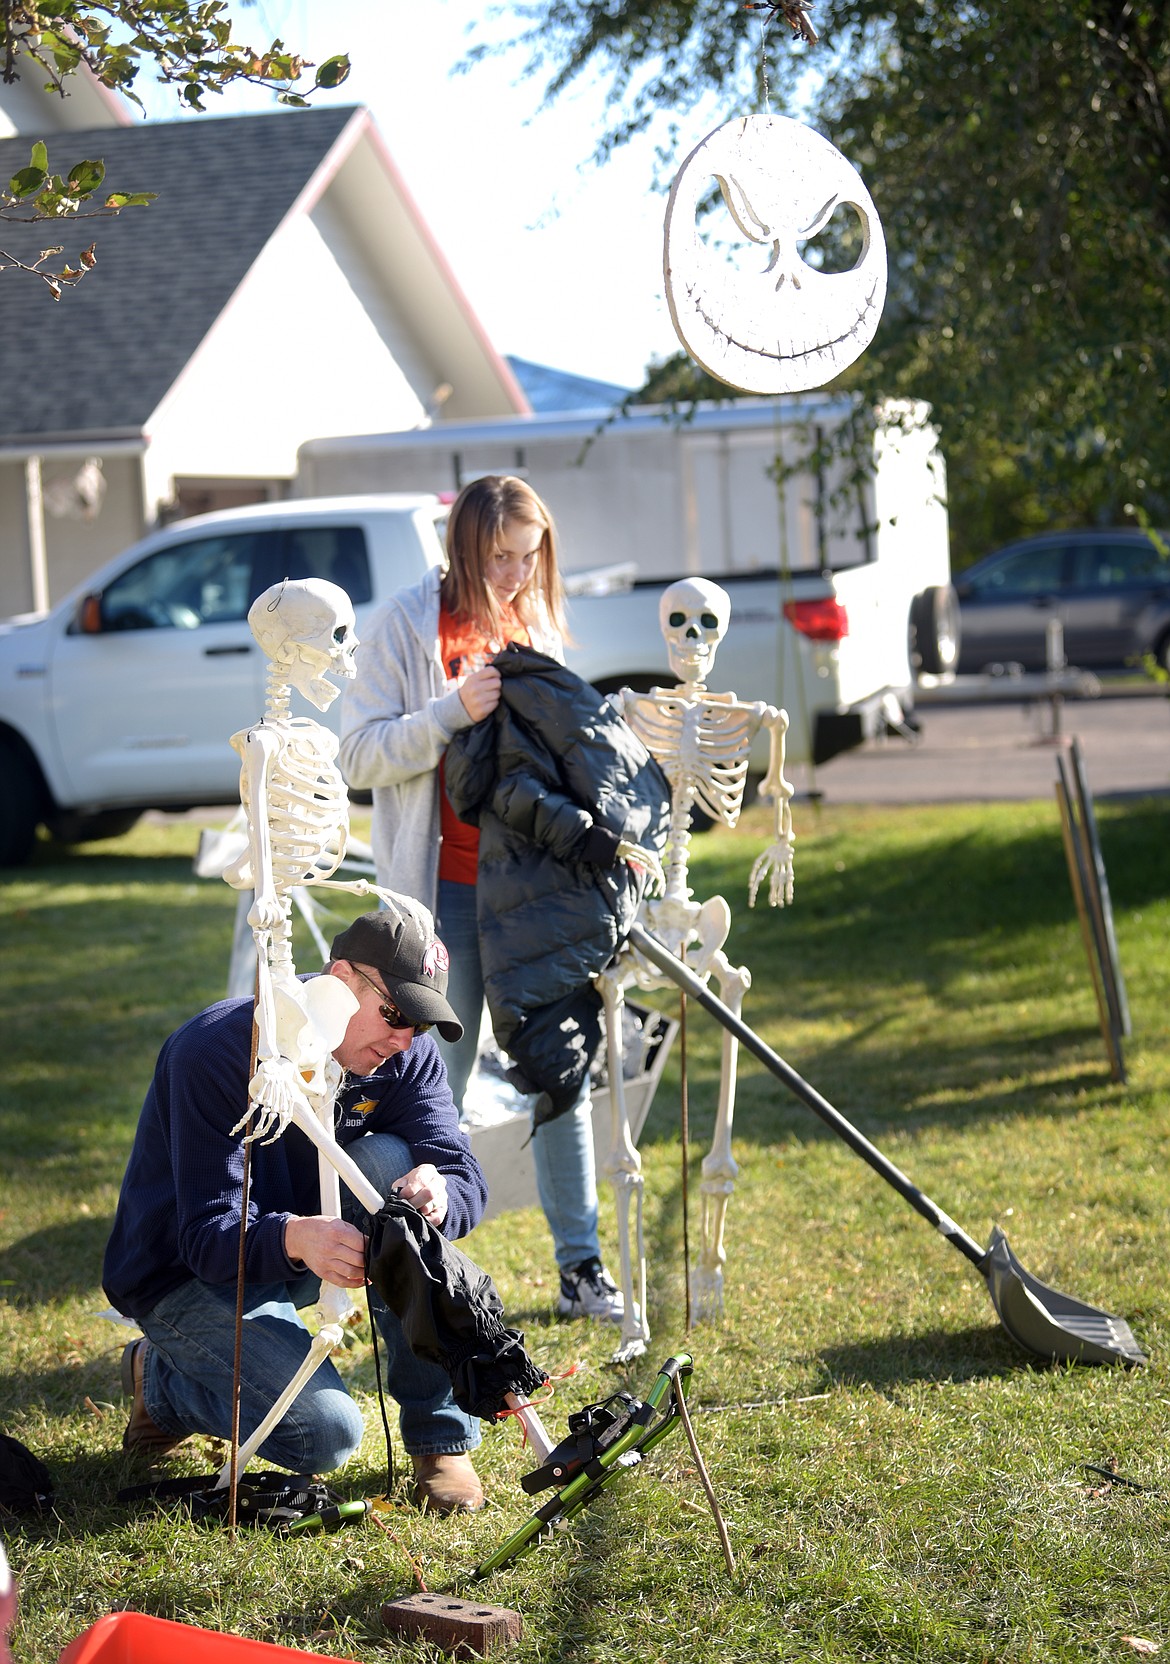 Cody Jones and his daughter, Clara, 14, begin preparing the skeletons in their yard for their new &quot;hunting&quot; theme on Friday evening, October 11, in Kalispell. Their yard, which can be seen at the southeast intersection of 11th Street West and 7th Avenue West, has become a local attraction as the family have created multiple themed scenes with their skeletons and various decorations.(Brenda Ahearn/Daily Inter Lake)